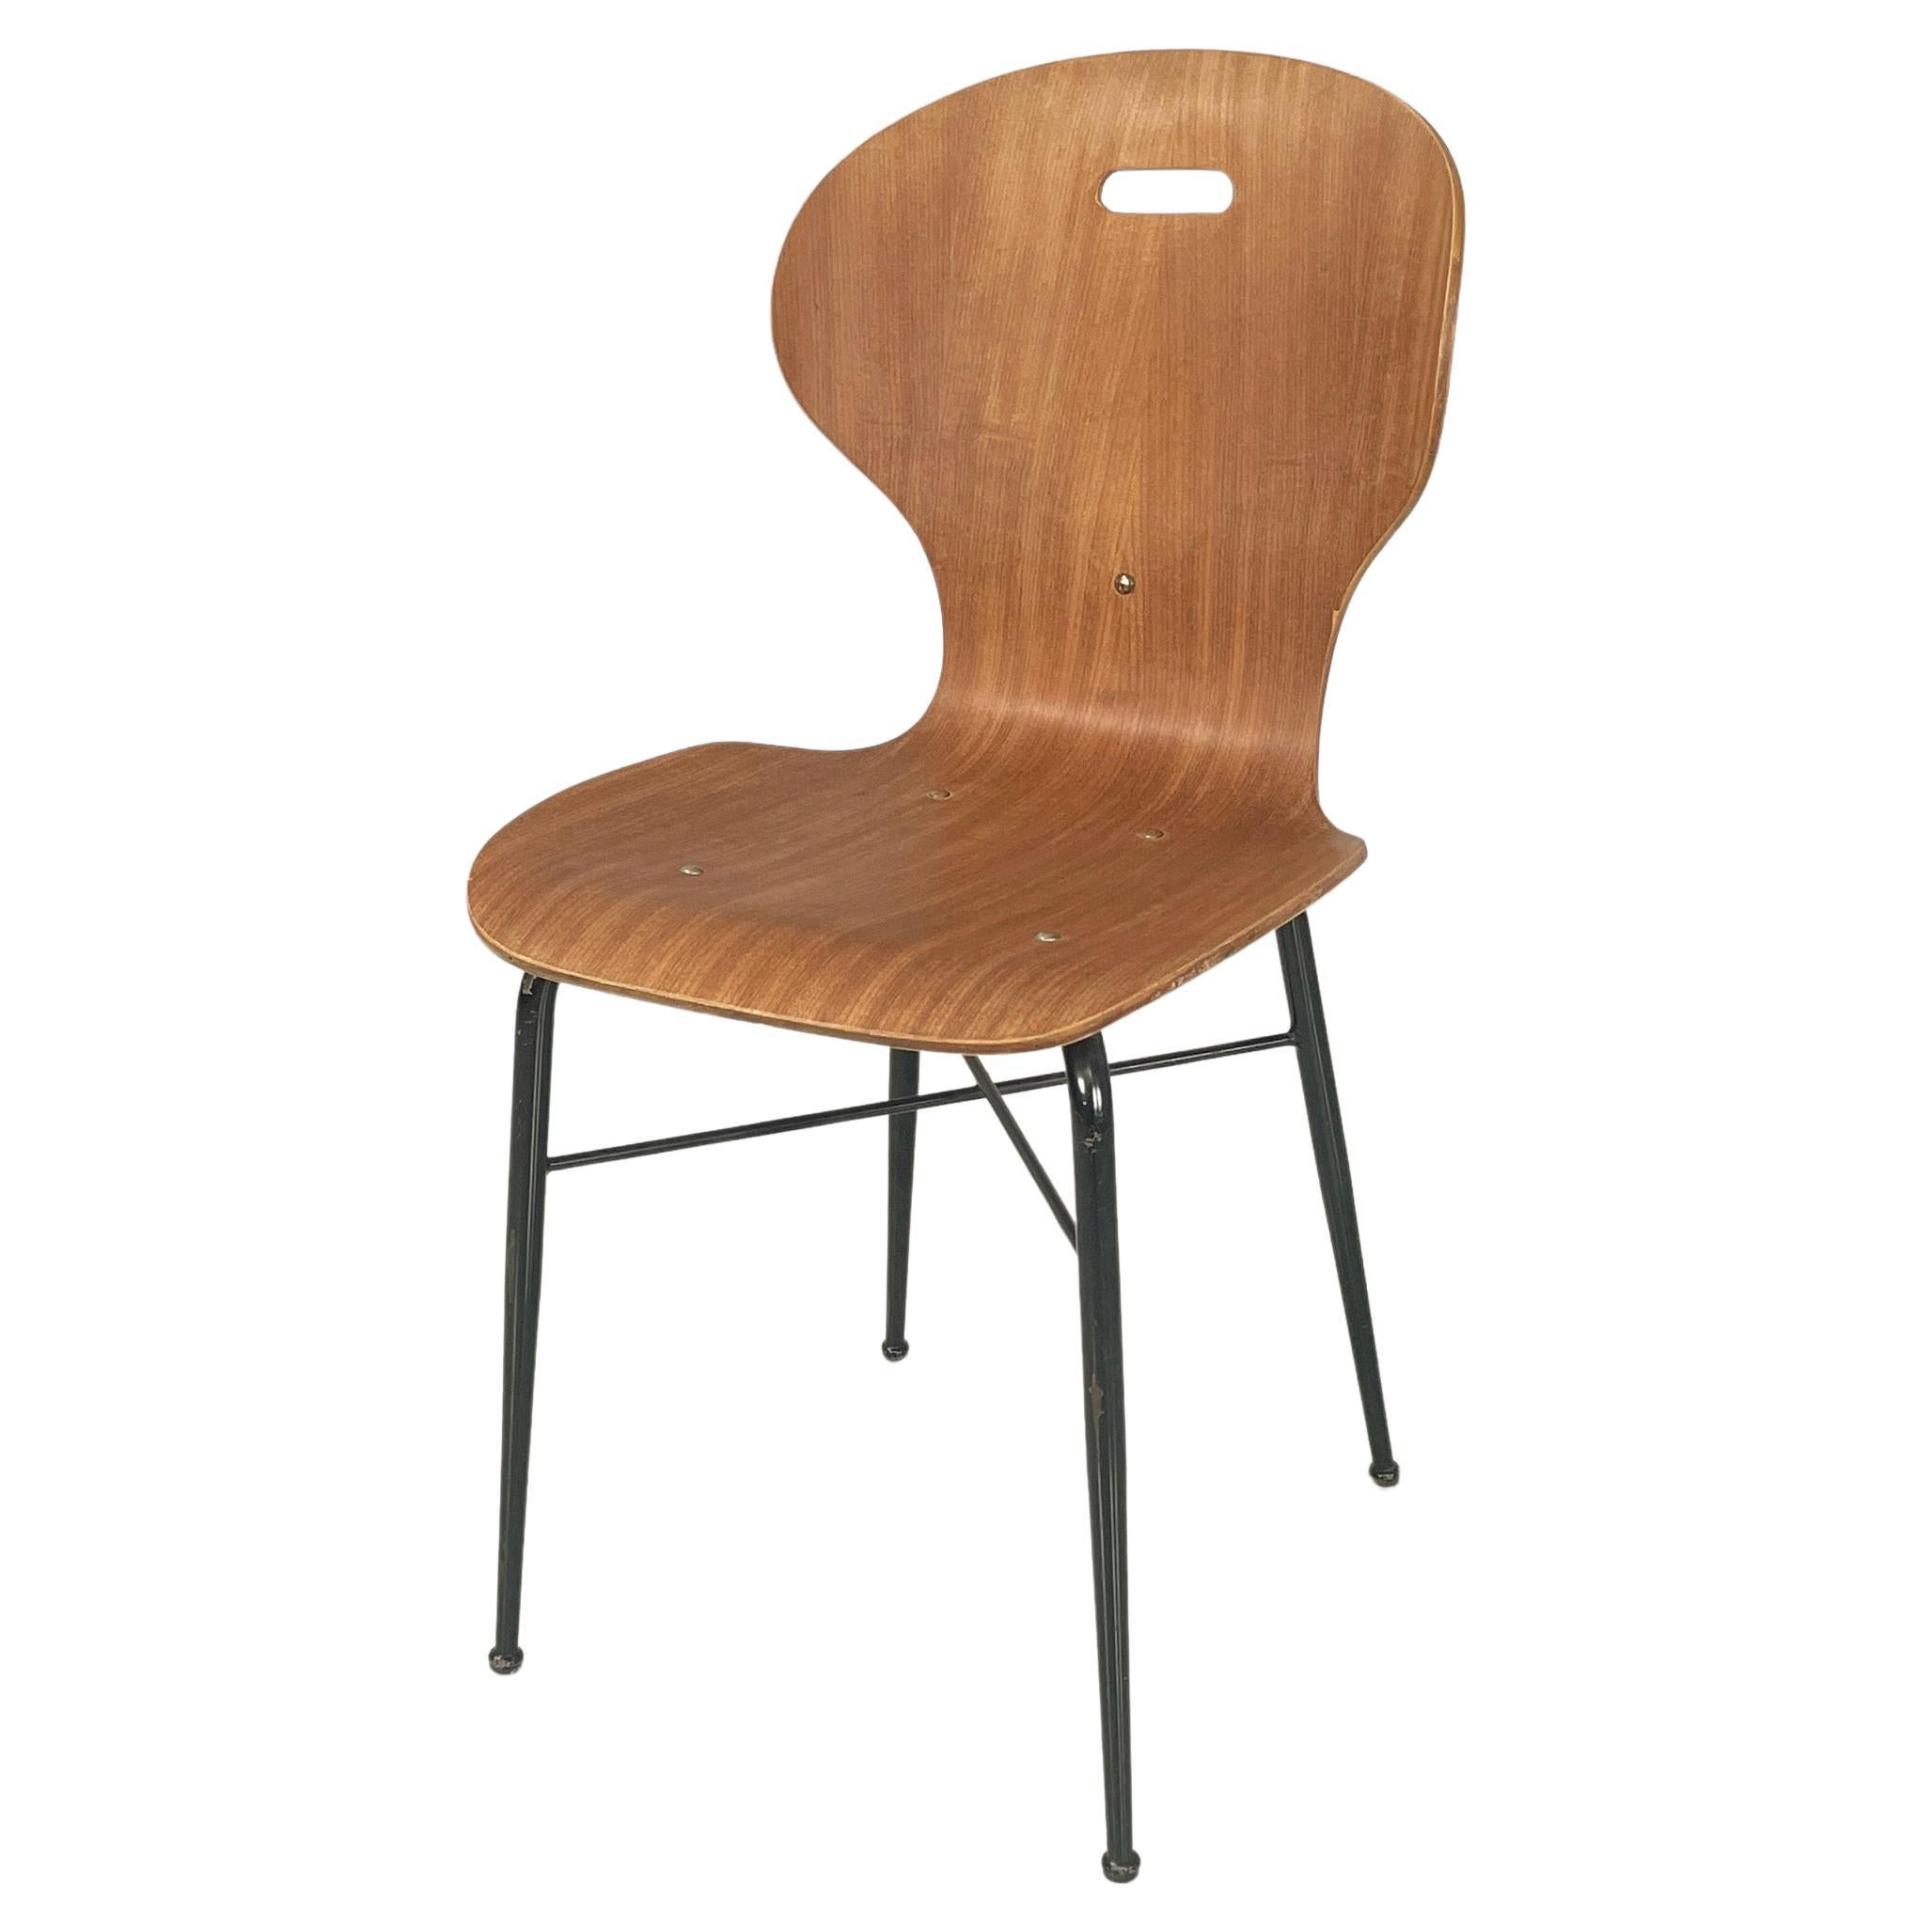 Italian mid-century modern Chair in curved wood and black metal, 1960s For Sale